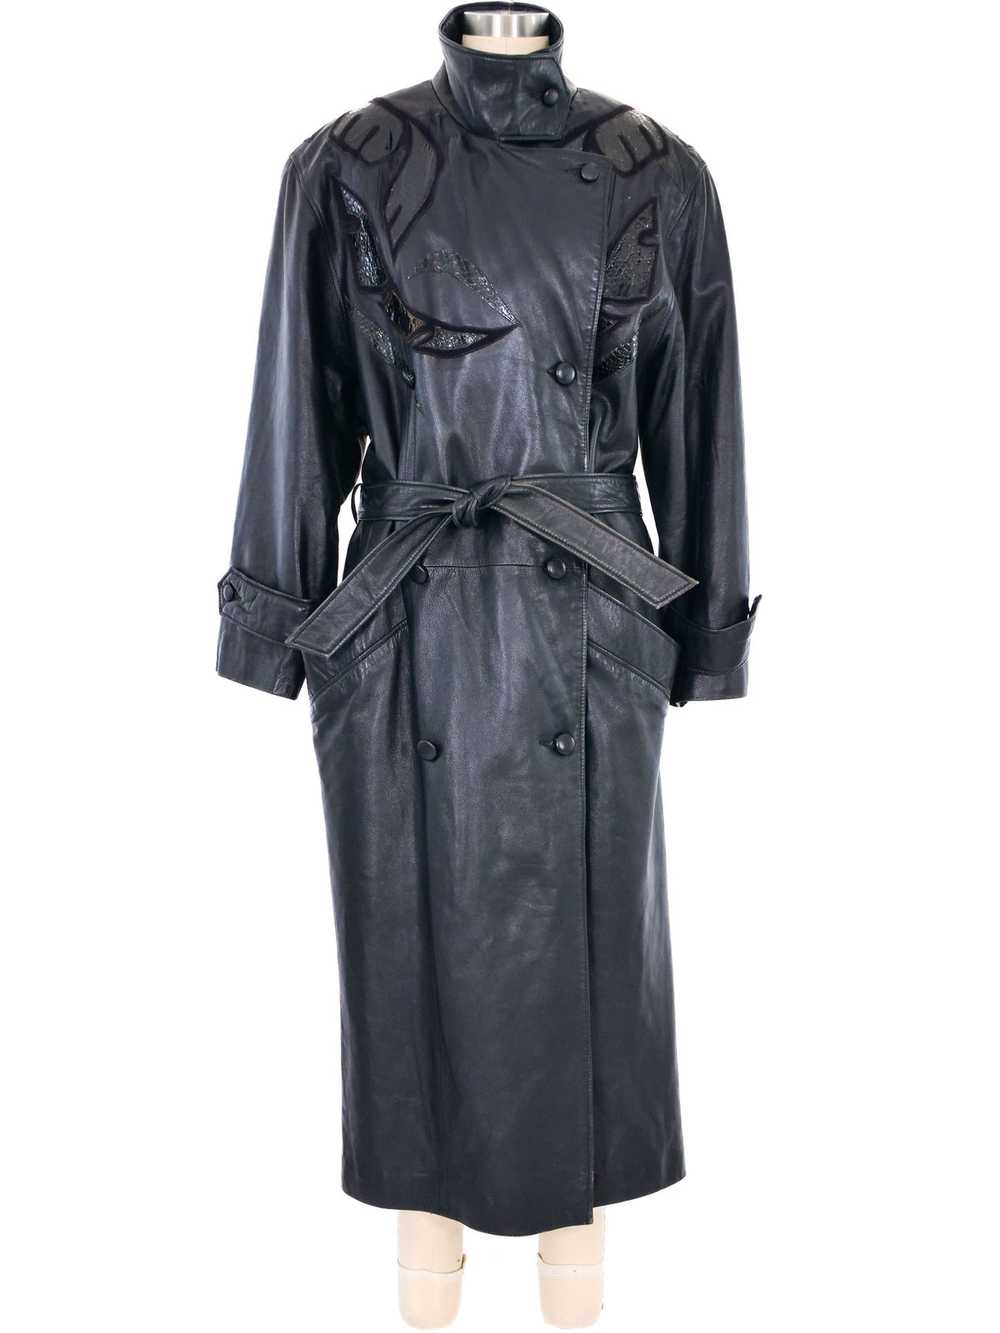 1980s Leather Applique Trench Coat - image 3